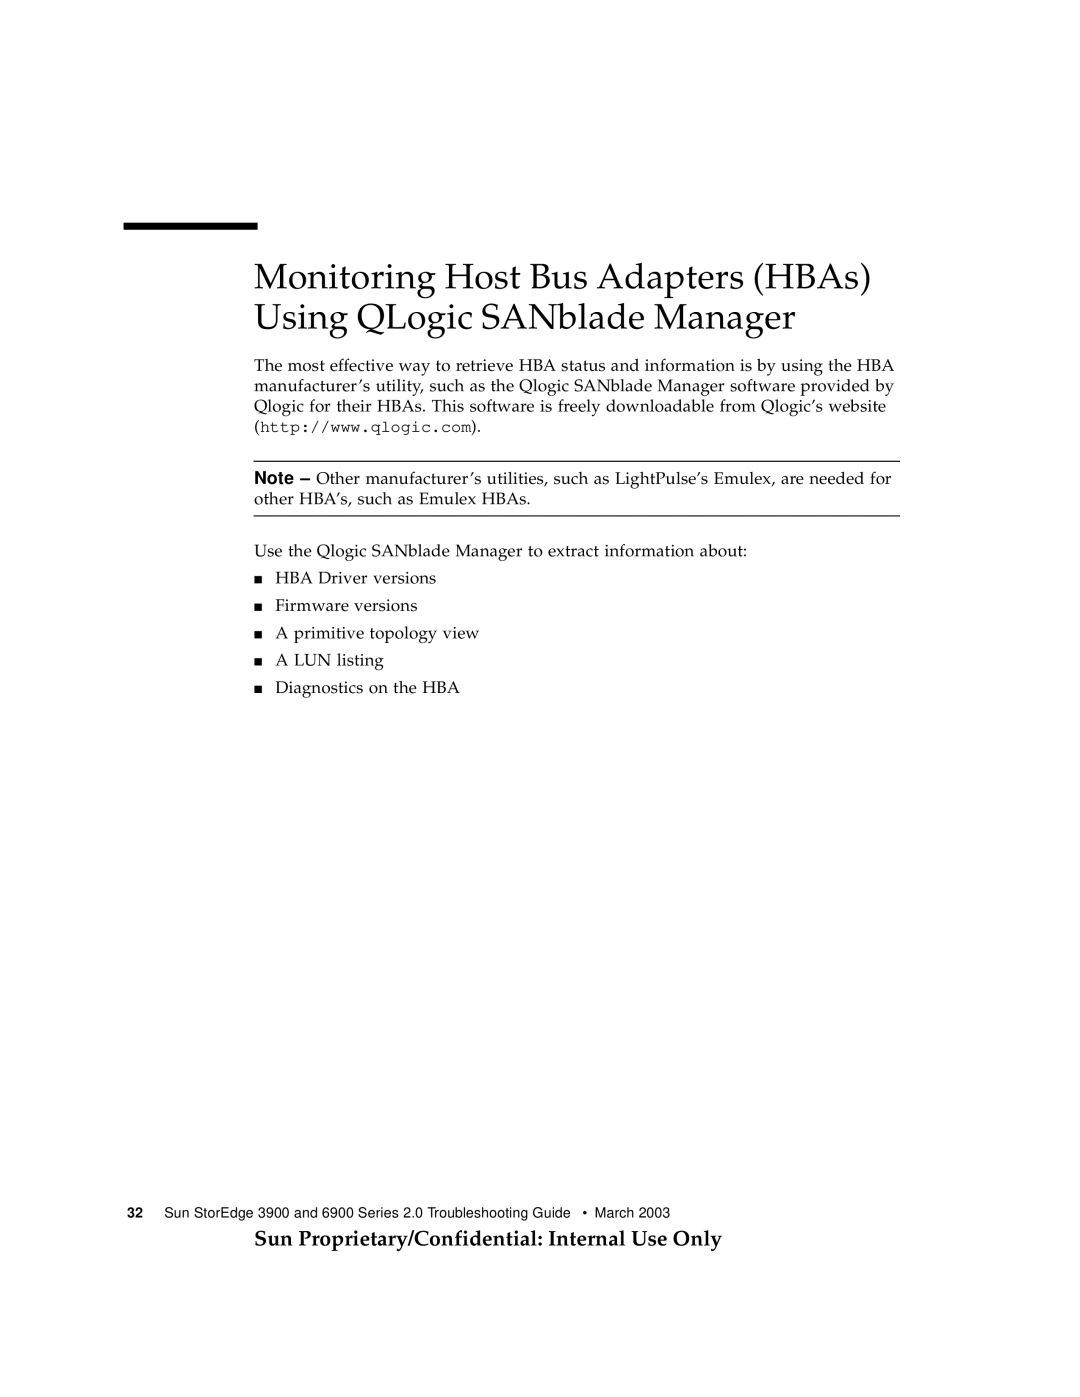 Sun Microsystems 3900, 6900 manual Monitoring Host Bus Adapters HBAs Using QLogic SANblade Manager 